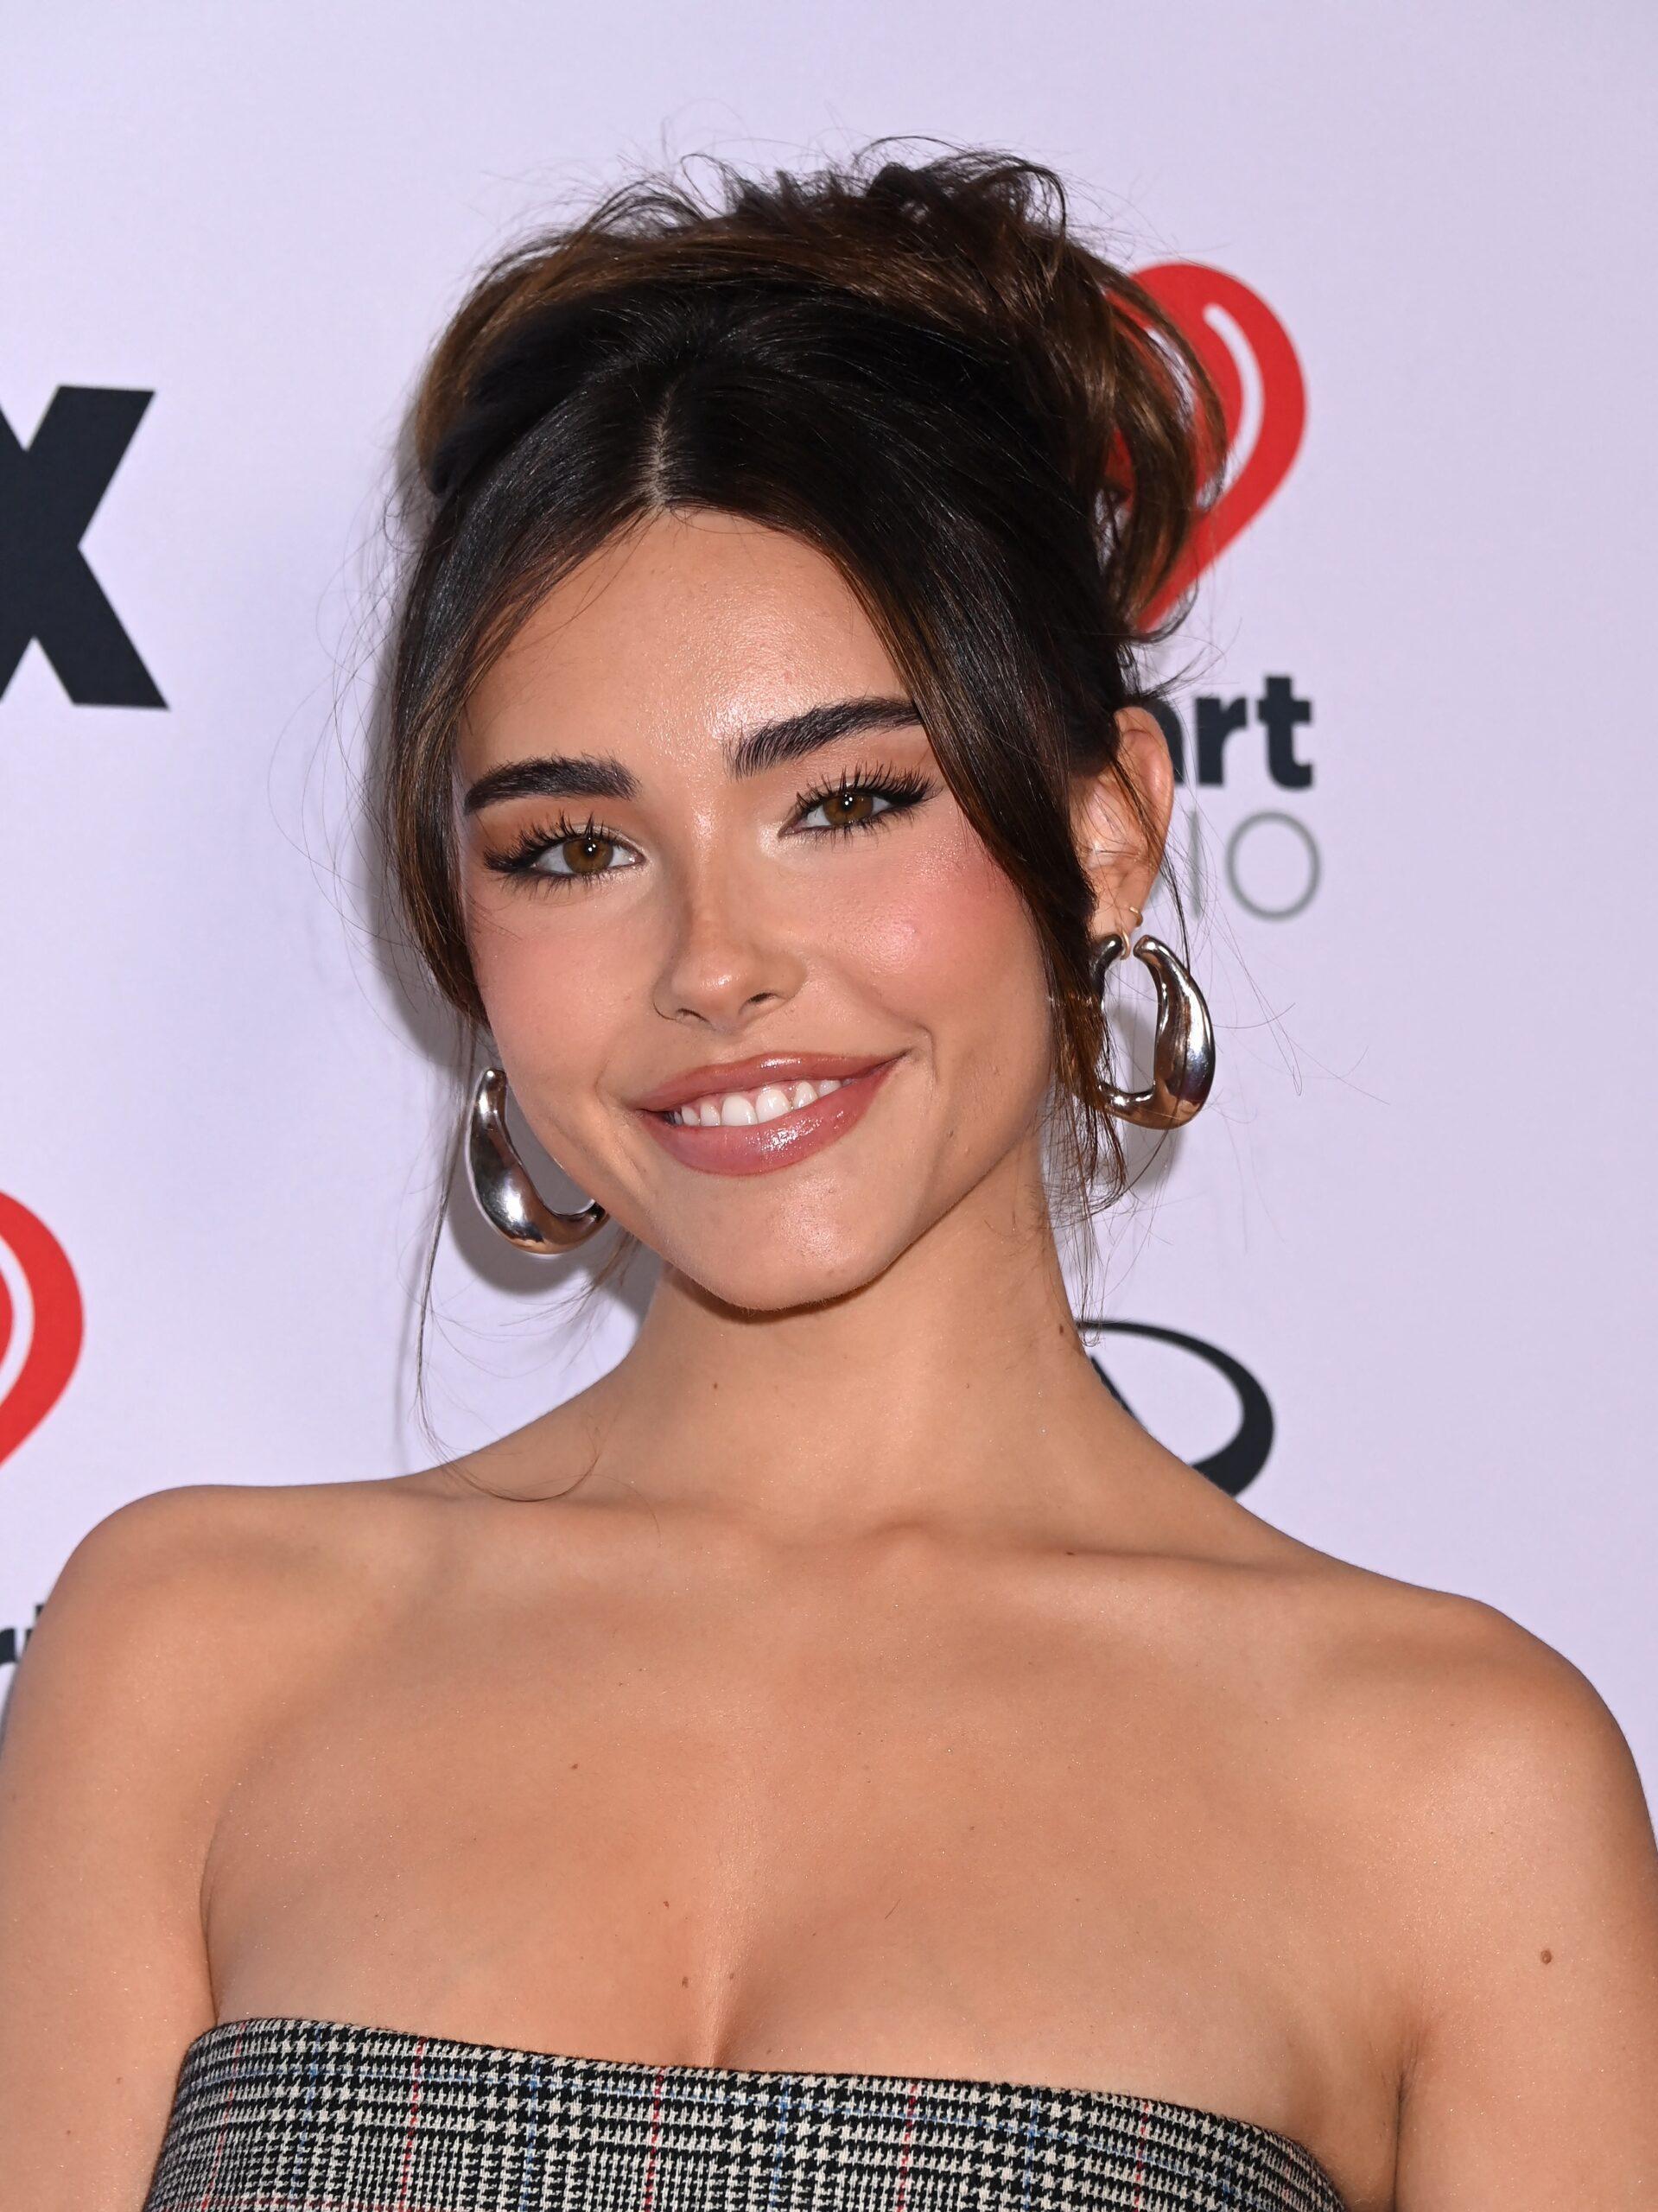 Madison Beer at the 2023 iHeartRadio Music Awards - Pressroom